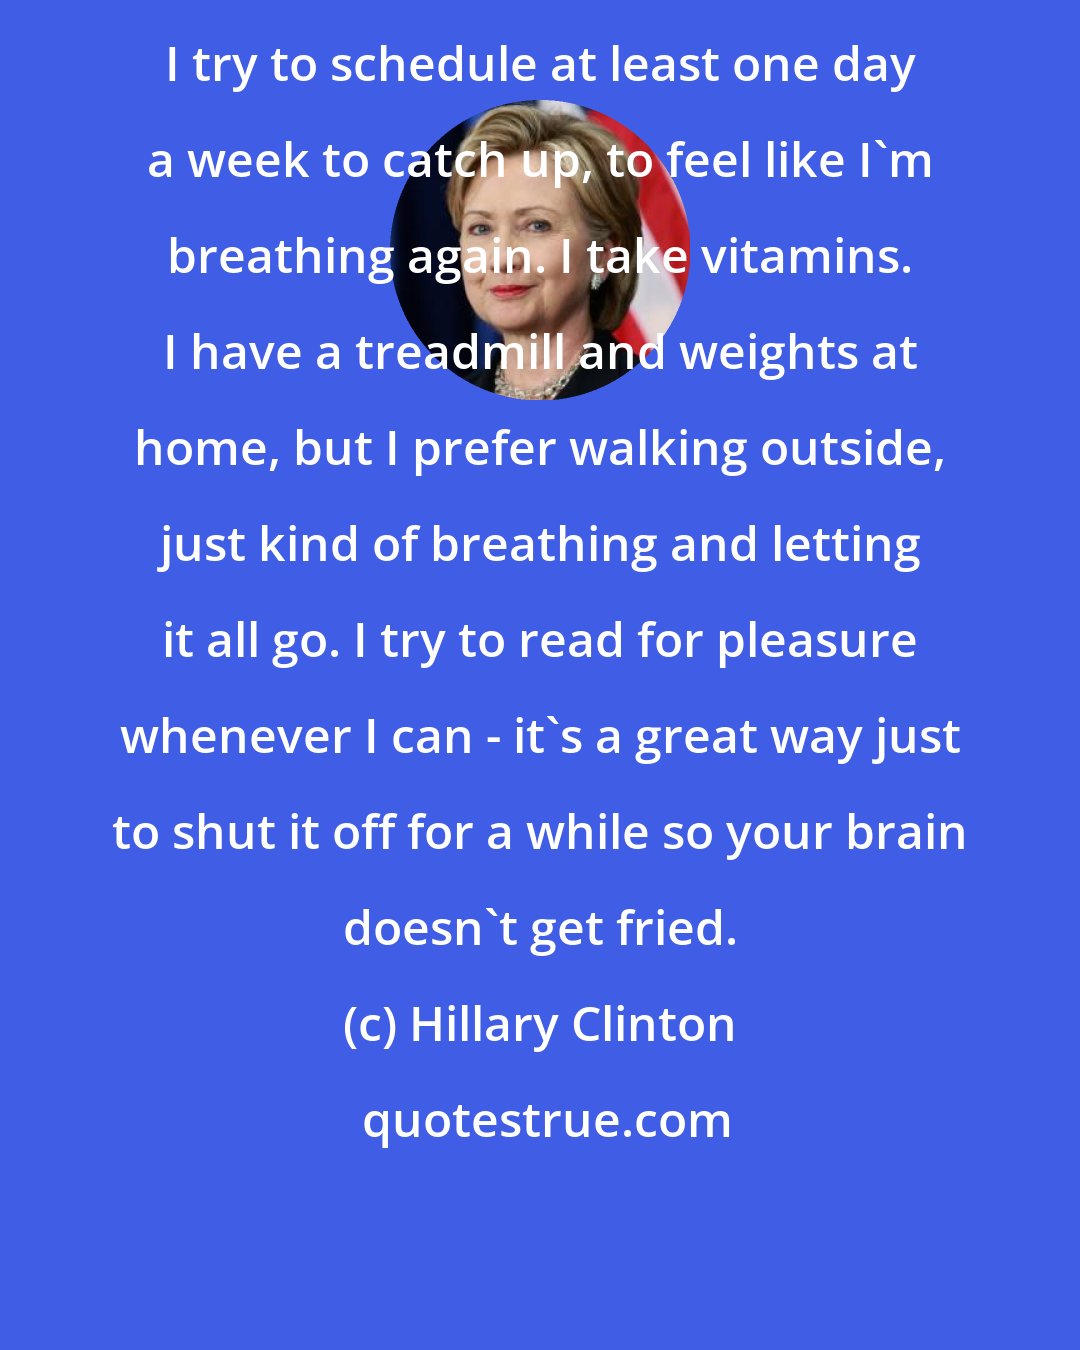 Hillary Clinton: I try to schedule at least one day a week to catch up, to feel like I'm breathing again. I take vitamins. I have a treadmill and weights at home, but I prefer walking outside, just kind of breathing and letting it all go. I try to read for pleasure whenever I can - it's a great way just to shut it off for a while so your brain doesn't get fried.